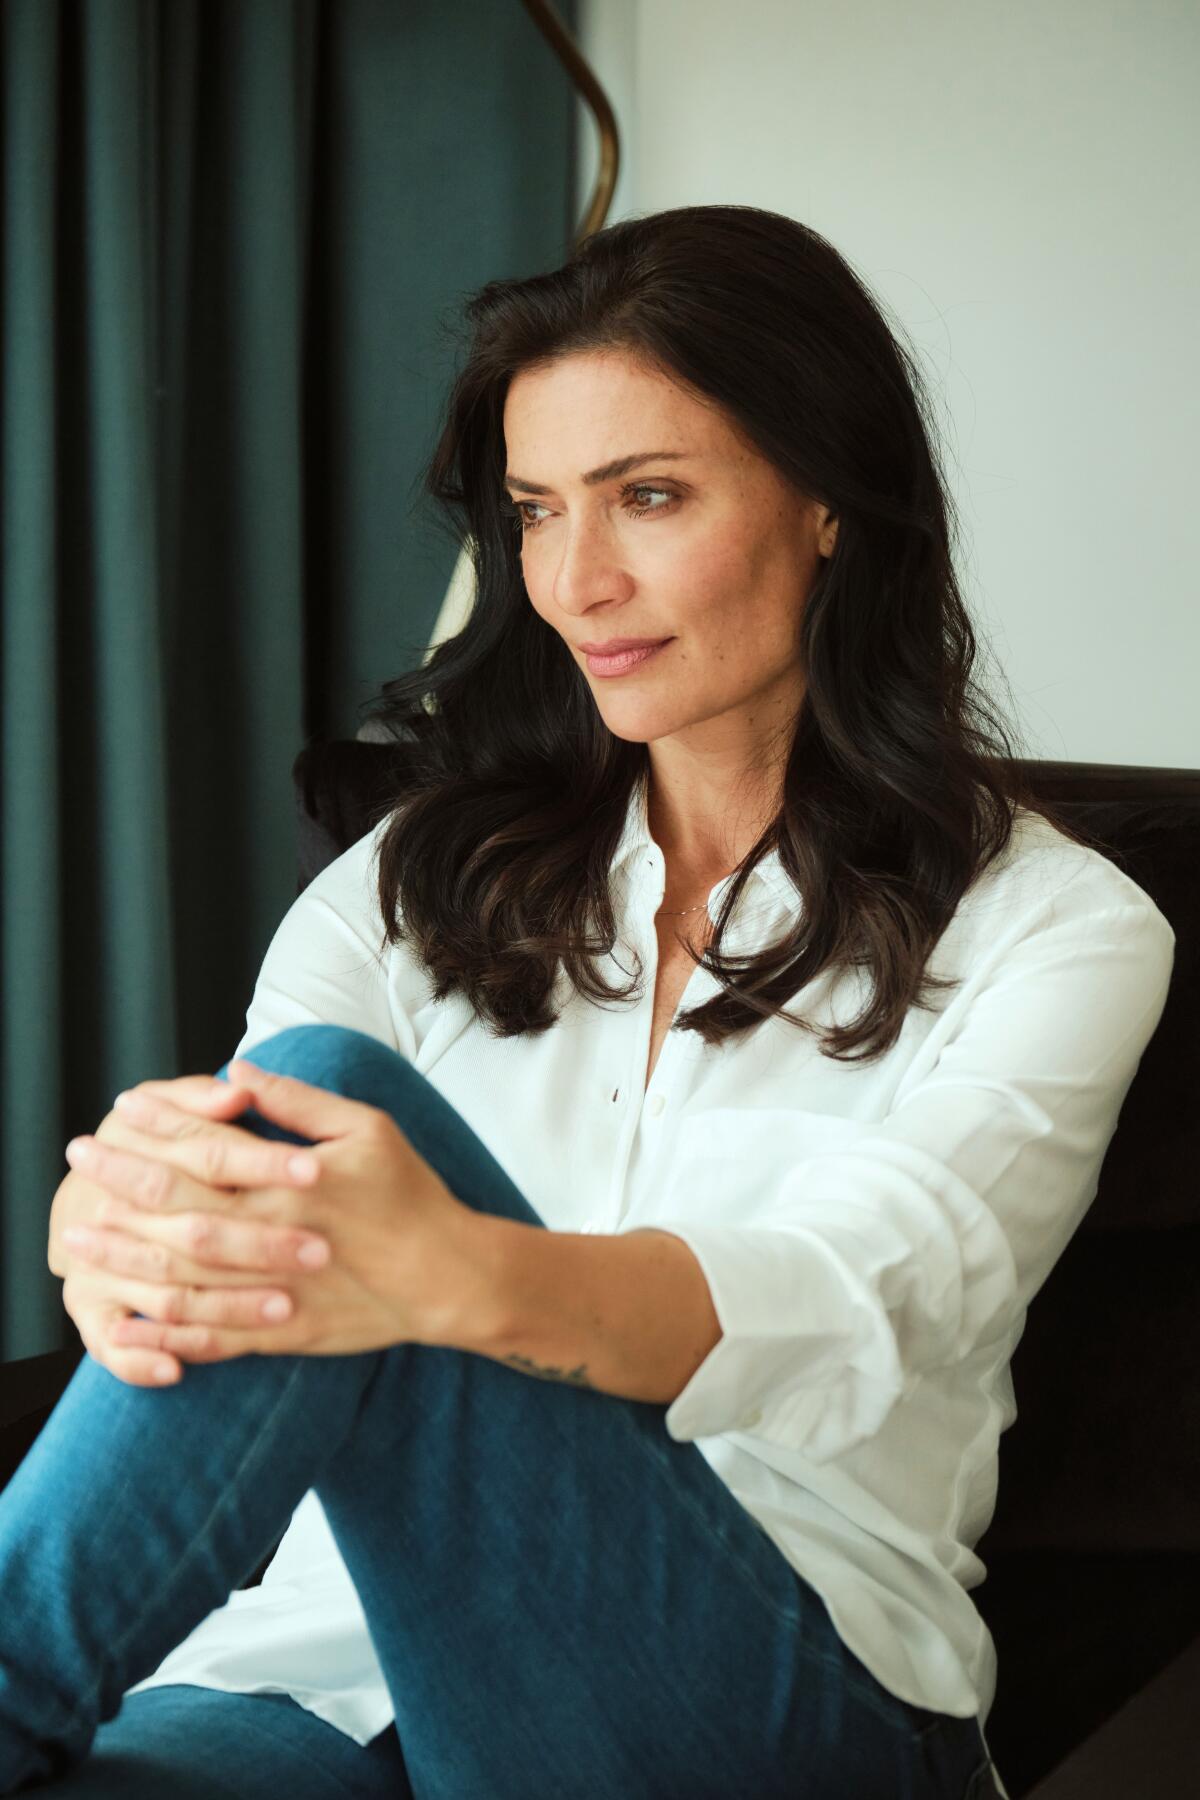 Ana Maria Orozco in a white shirt and blue jeans sitting with her hands wrapped around her knee.